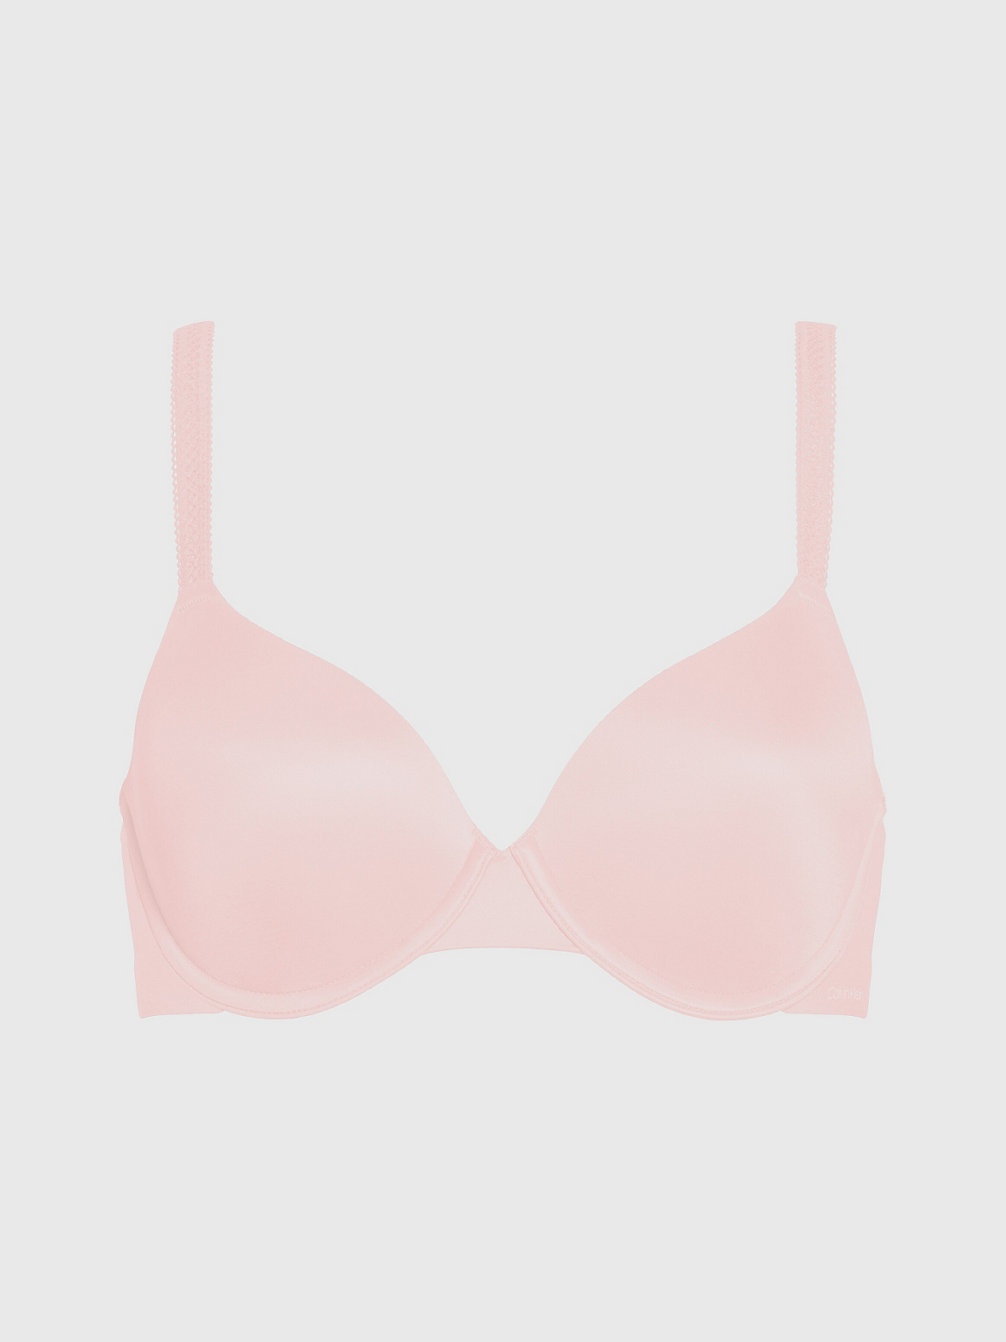 Soutien-Gorge Invisible - Liquid Touch > NYMPHS THIGH > undefined femmes > Calvin Klein